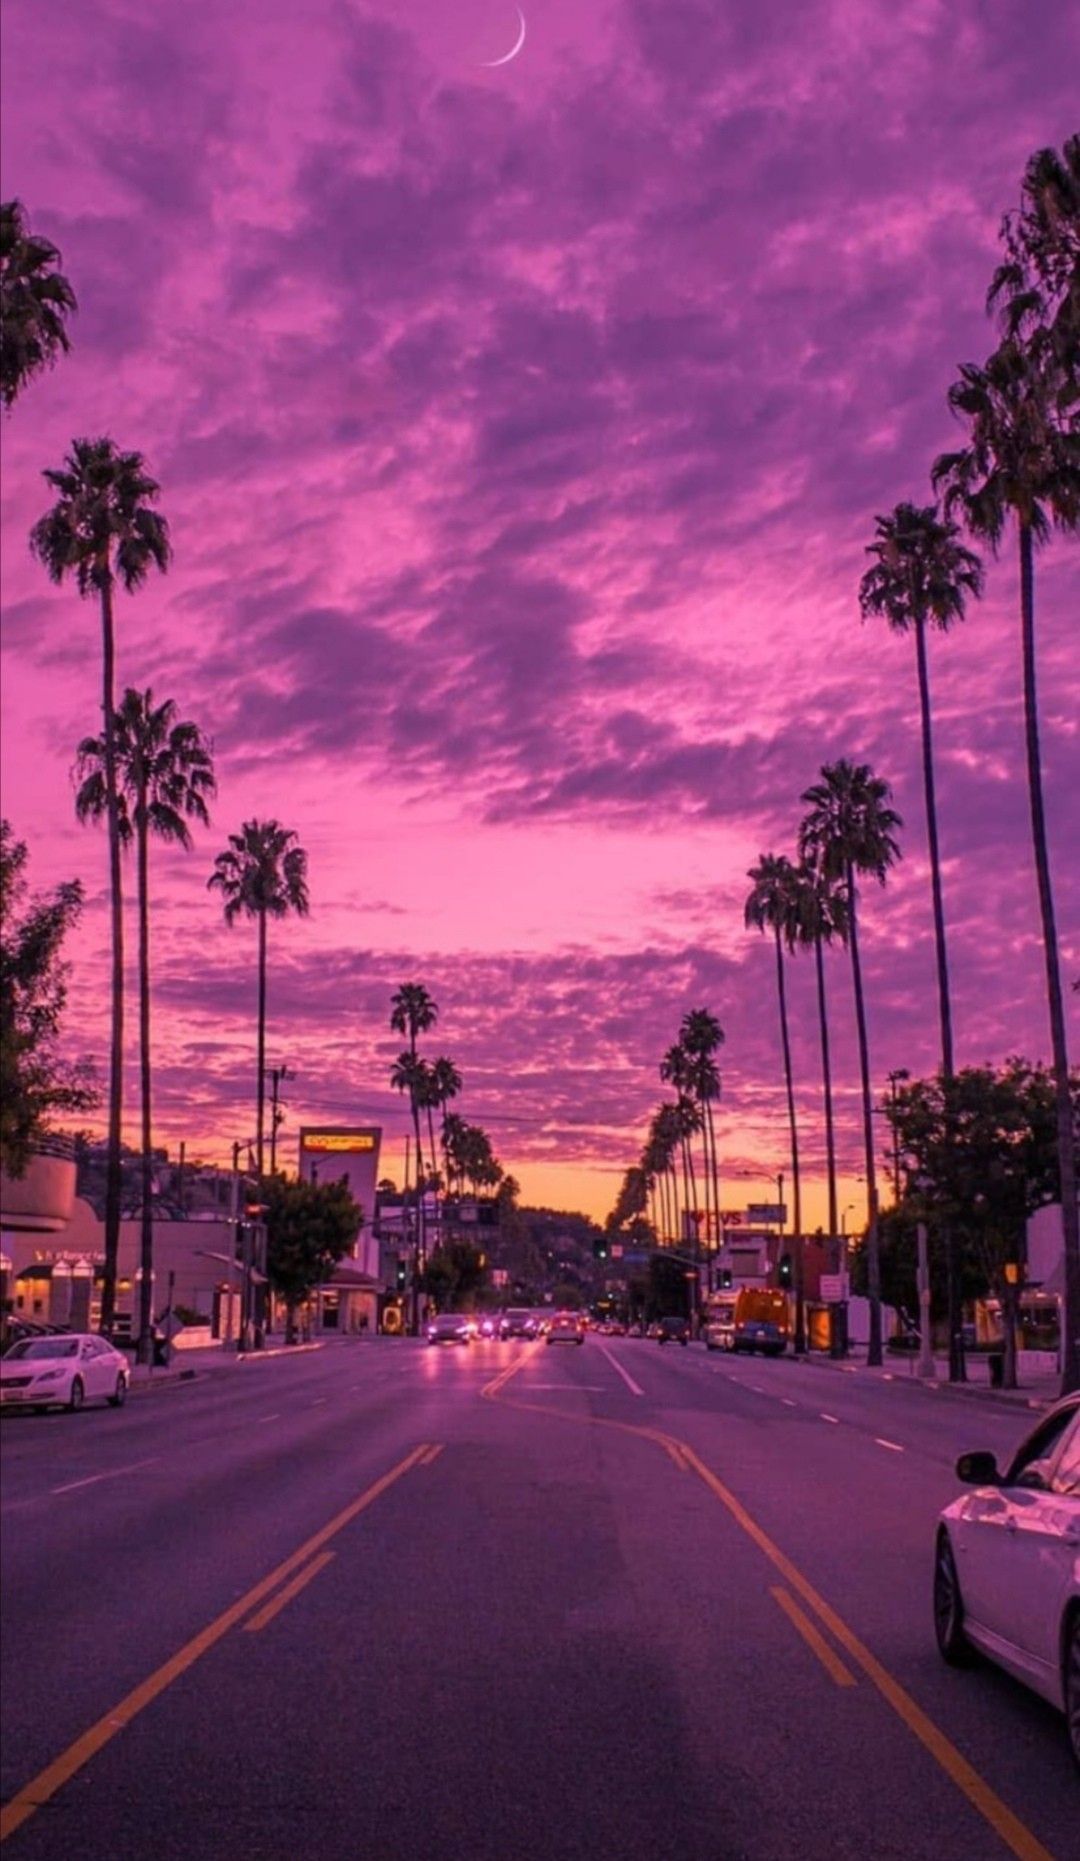 A purple sunset over a street lined with palm trees - Miami